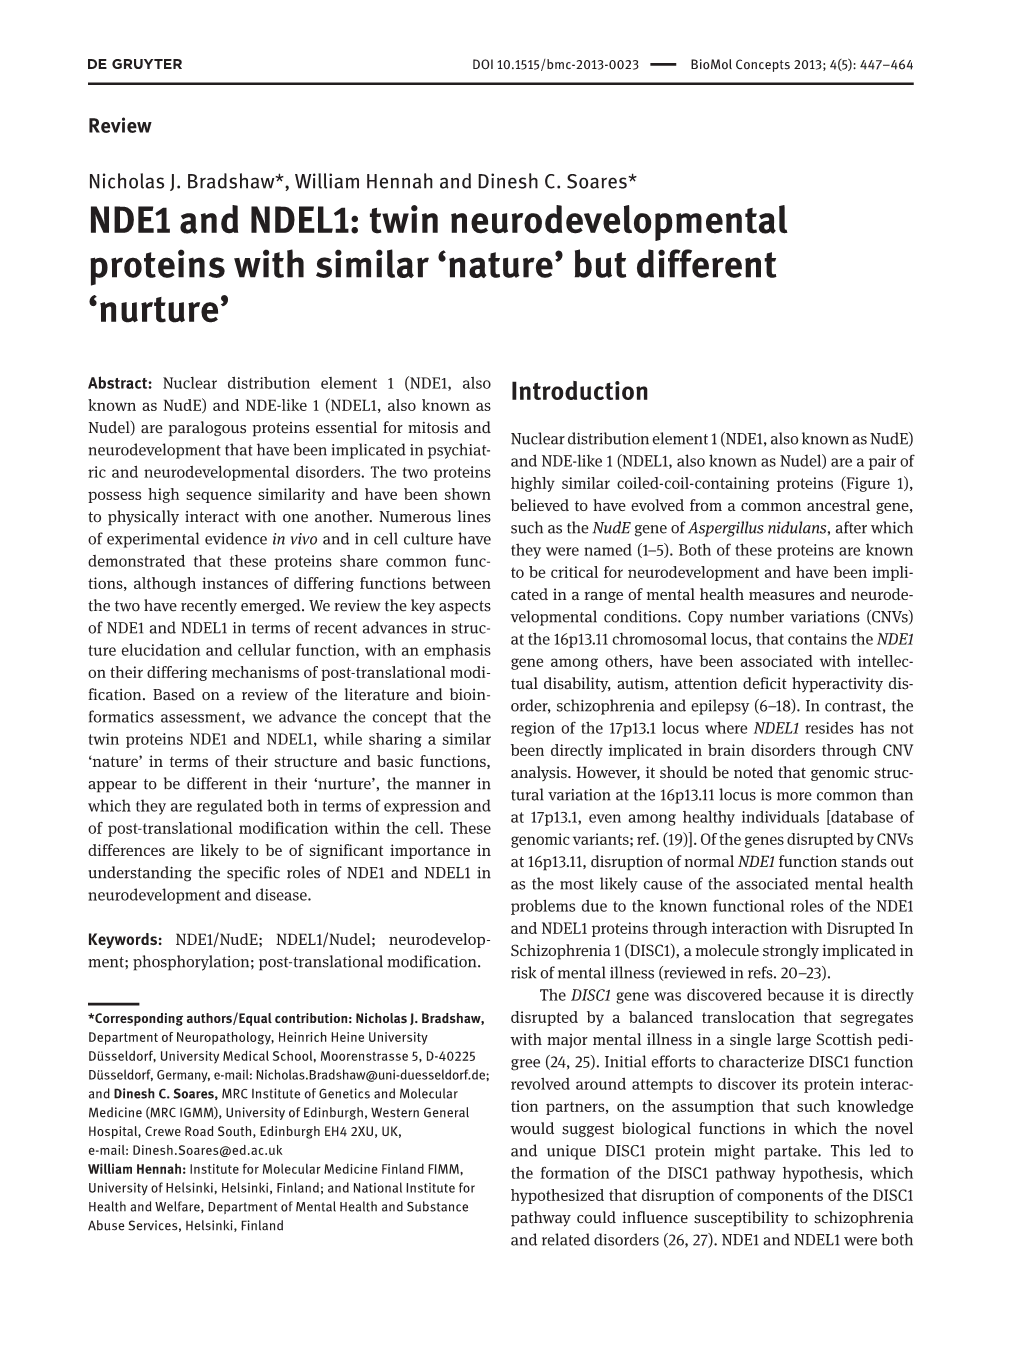 NDE1 and NDEL1: Twin Neurodevelopmental Proteins with Similar ‘Nature’ but Different ‘Nurture’